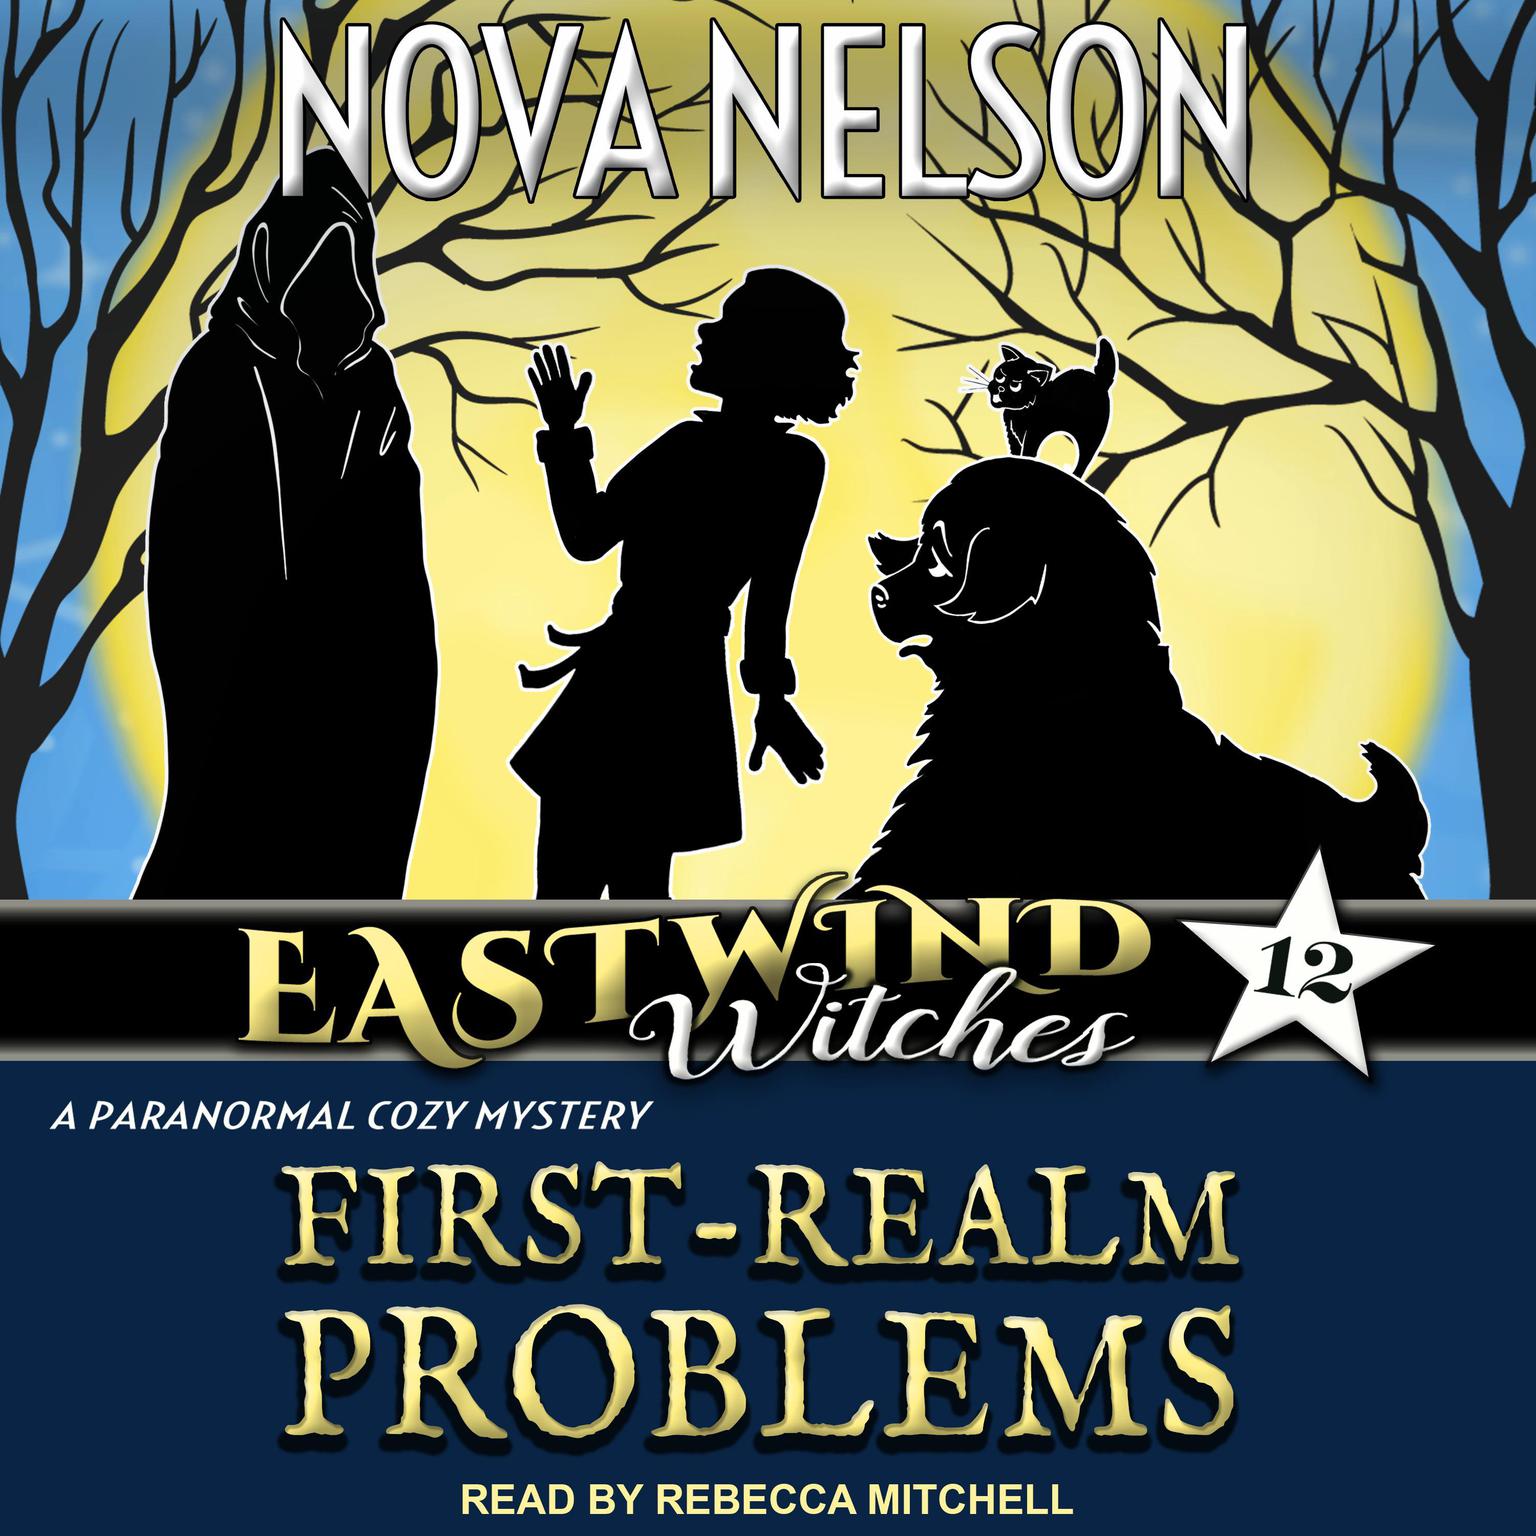 First-Realm Problems Audiobook, by Nova Nelson